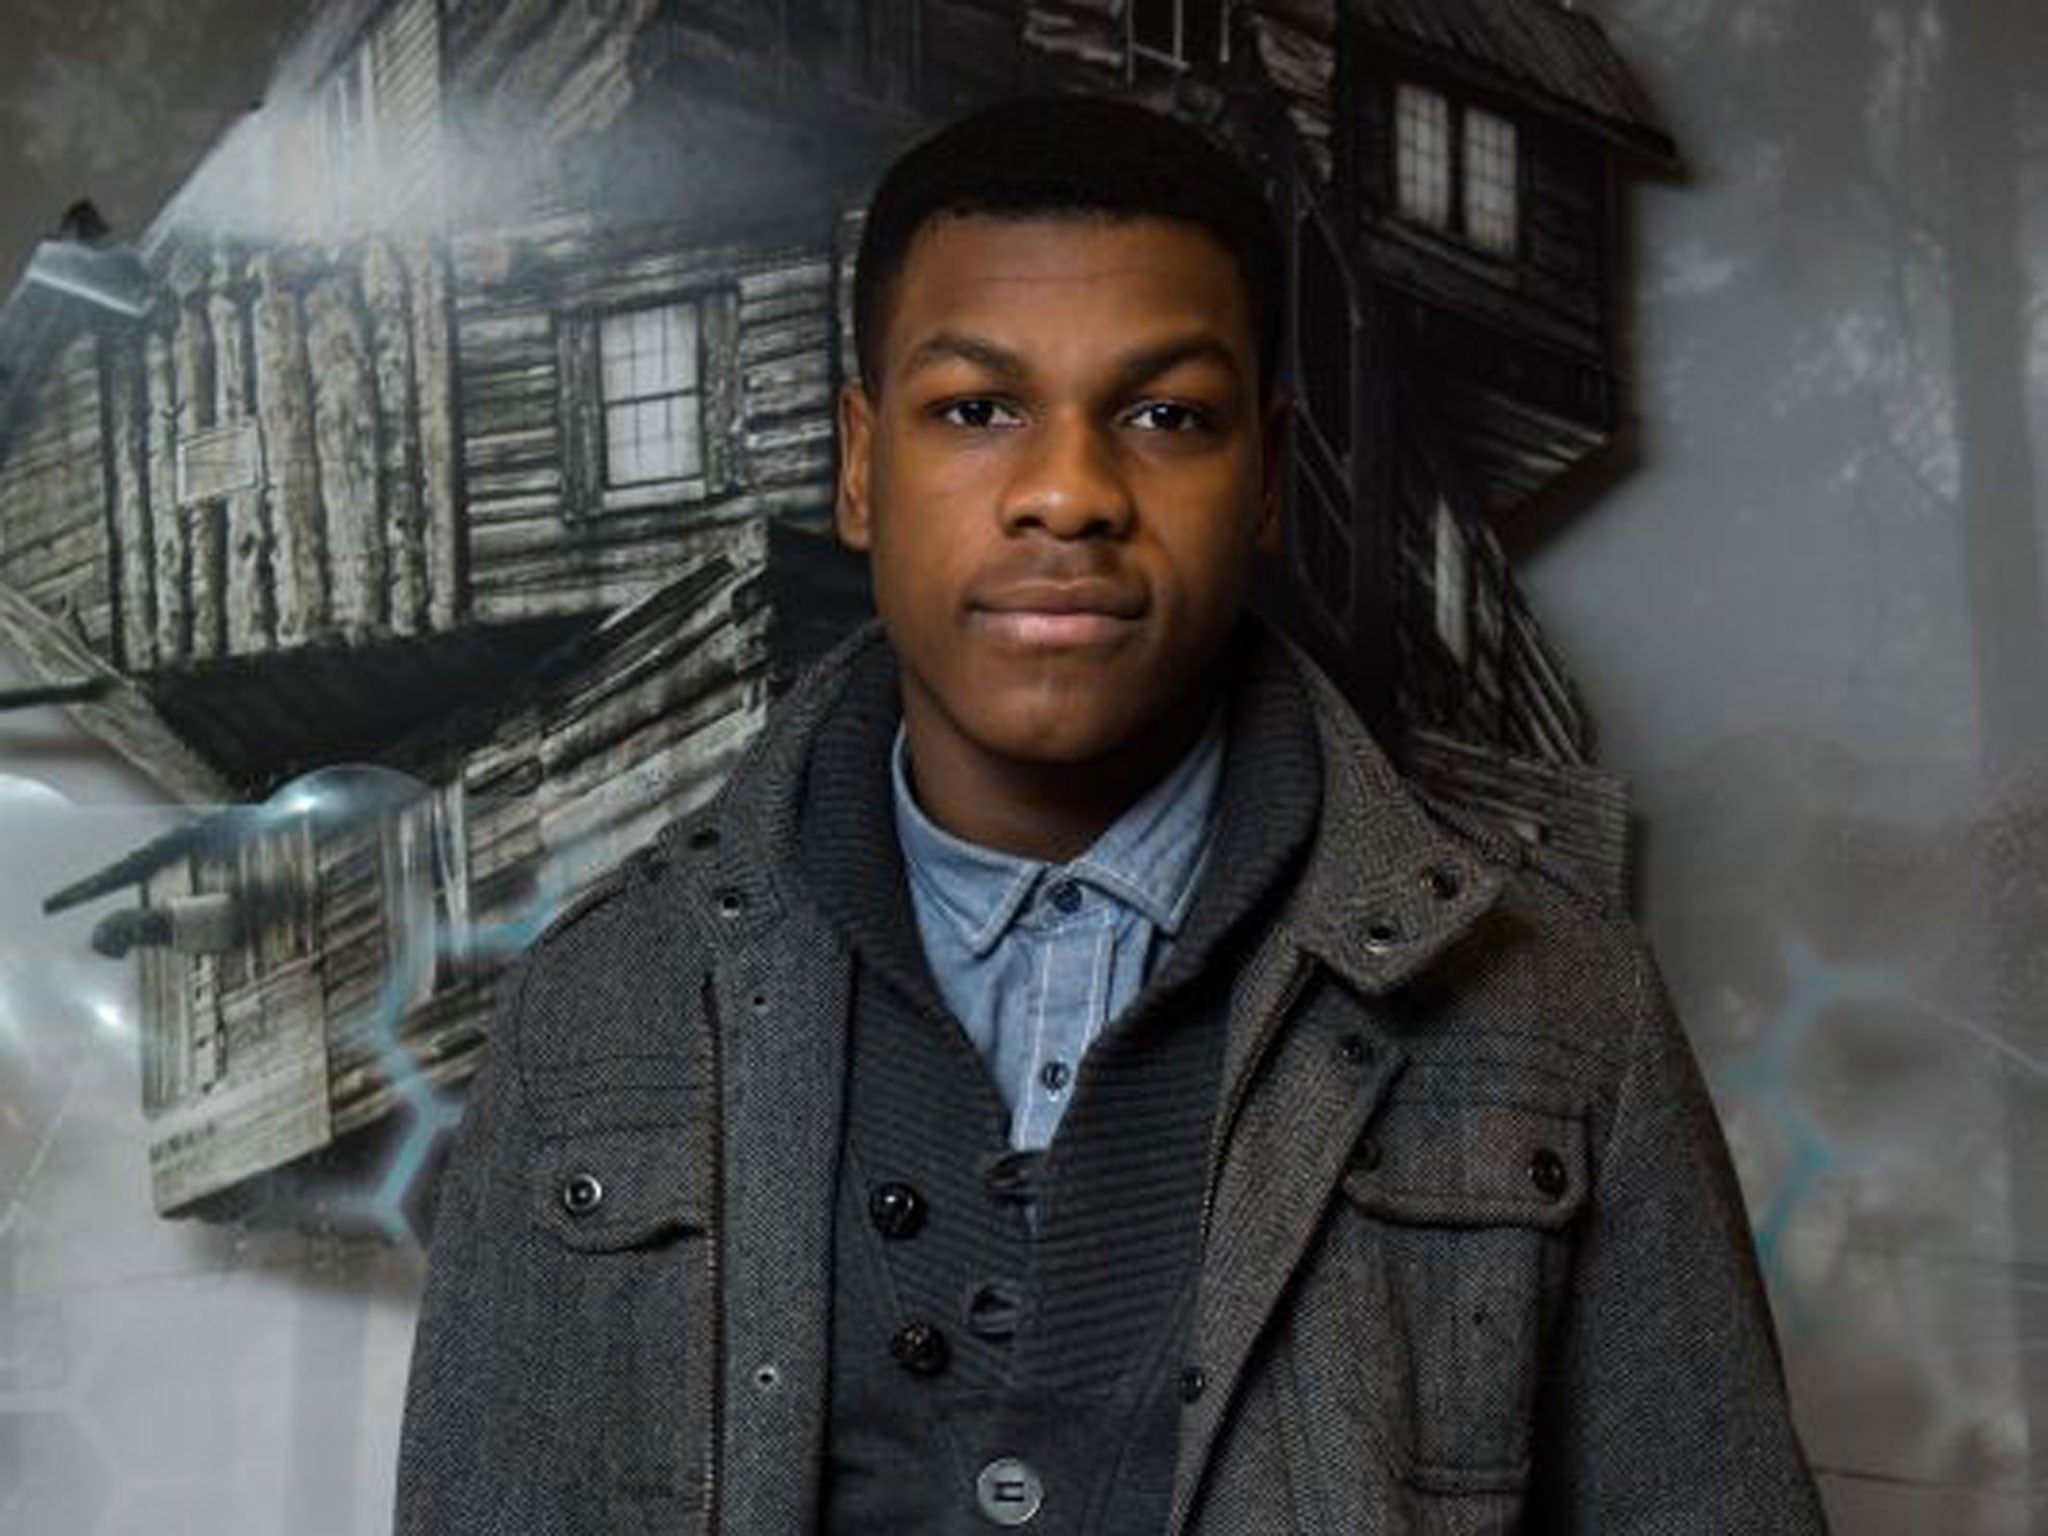 The Peckham born and raised actor who won a Bafta for his role as Finn in Star Wars: The Force Awakens took to Twitter this morning in the attempt to clarify any confusion over his position